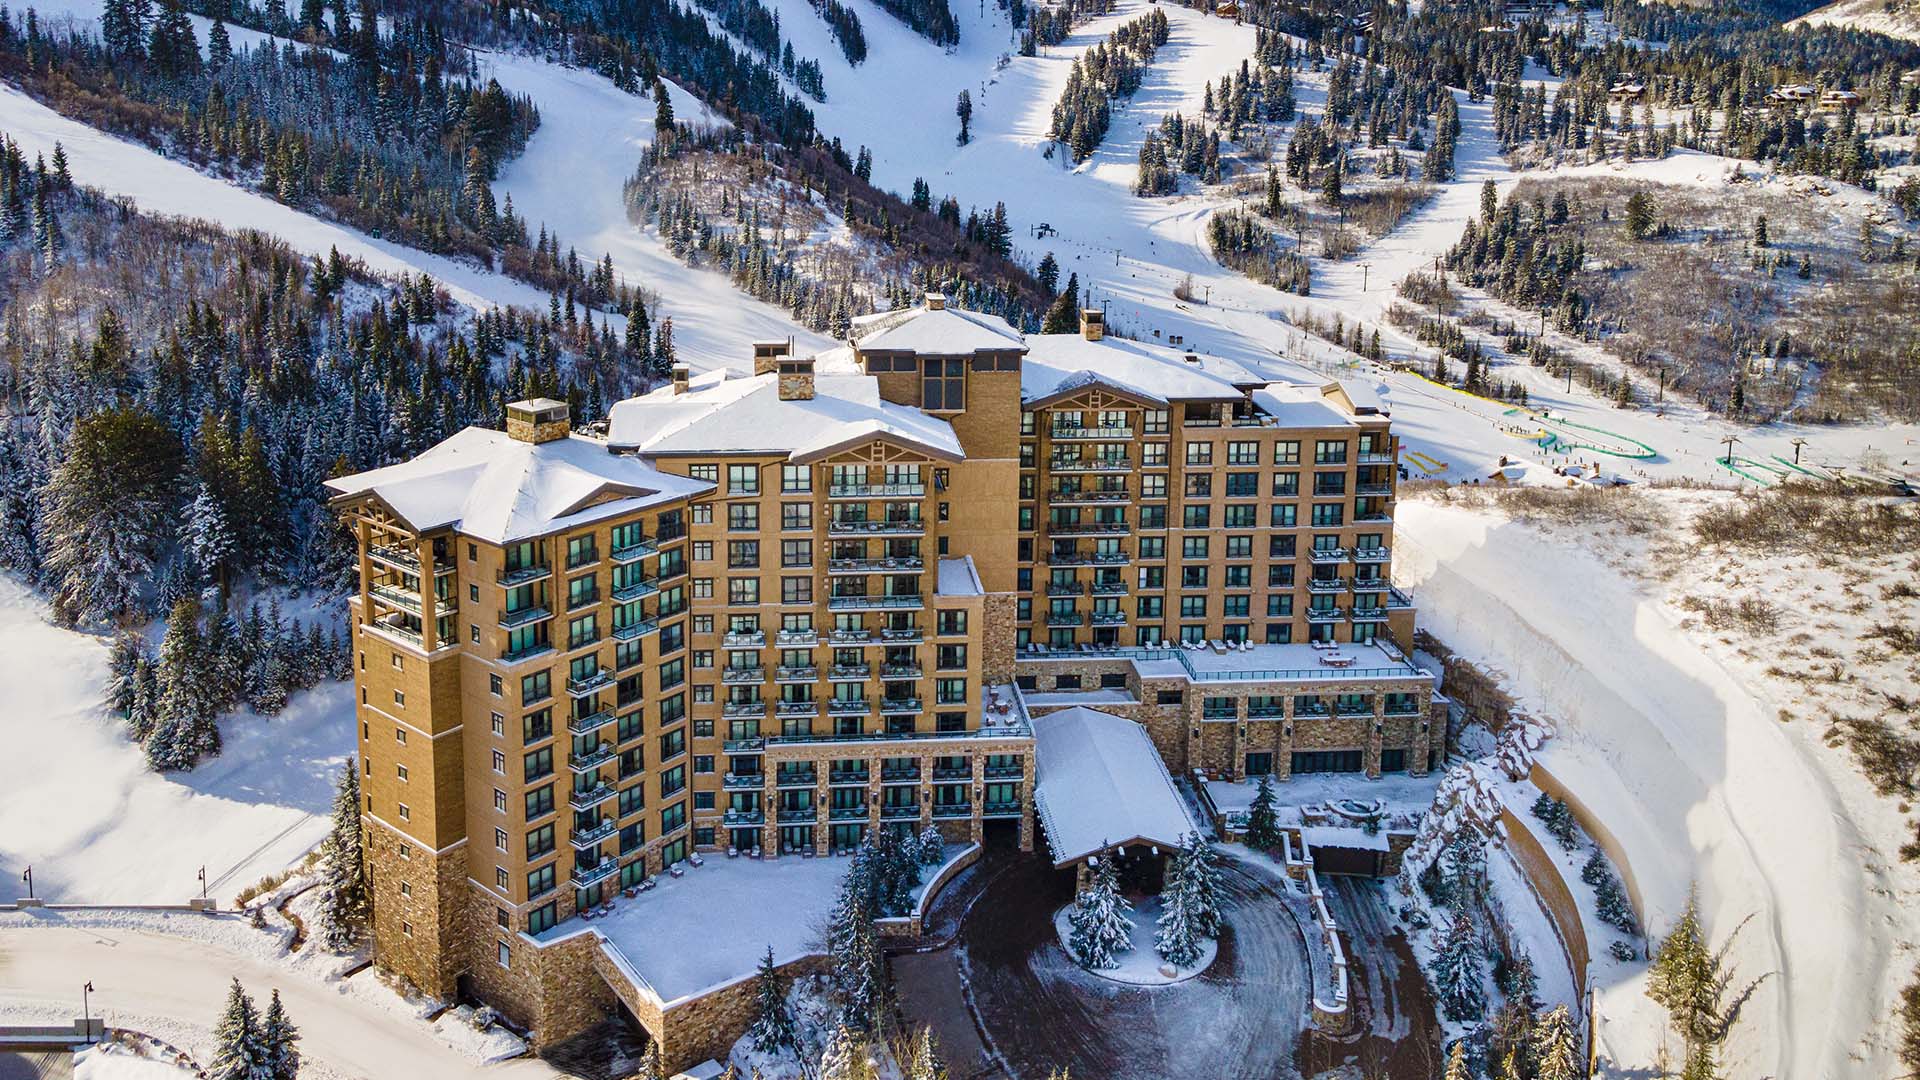 aerial view of The St. Regis Deer Valley and the surrounding snowy, mountainous landscape